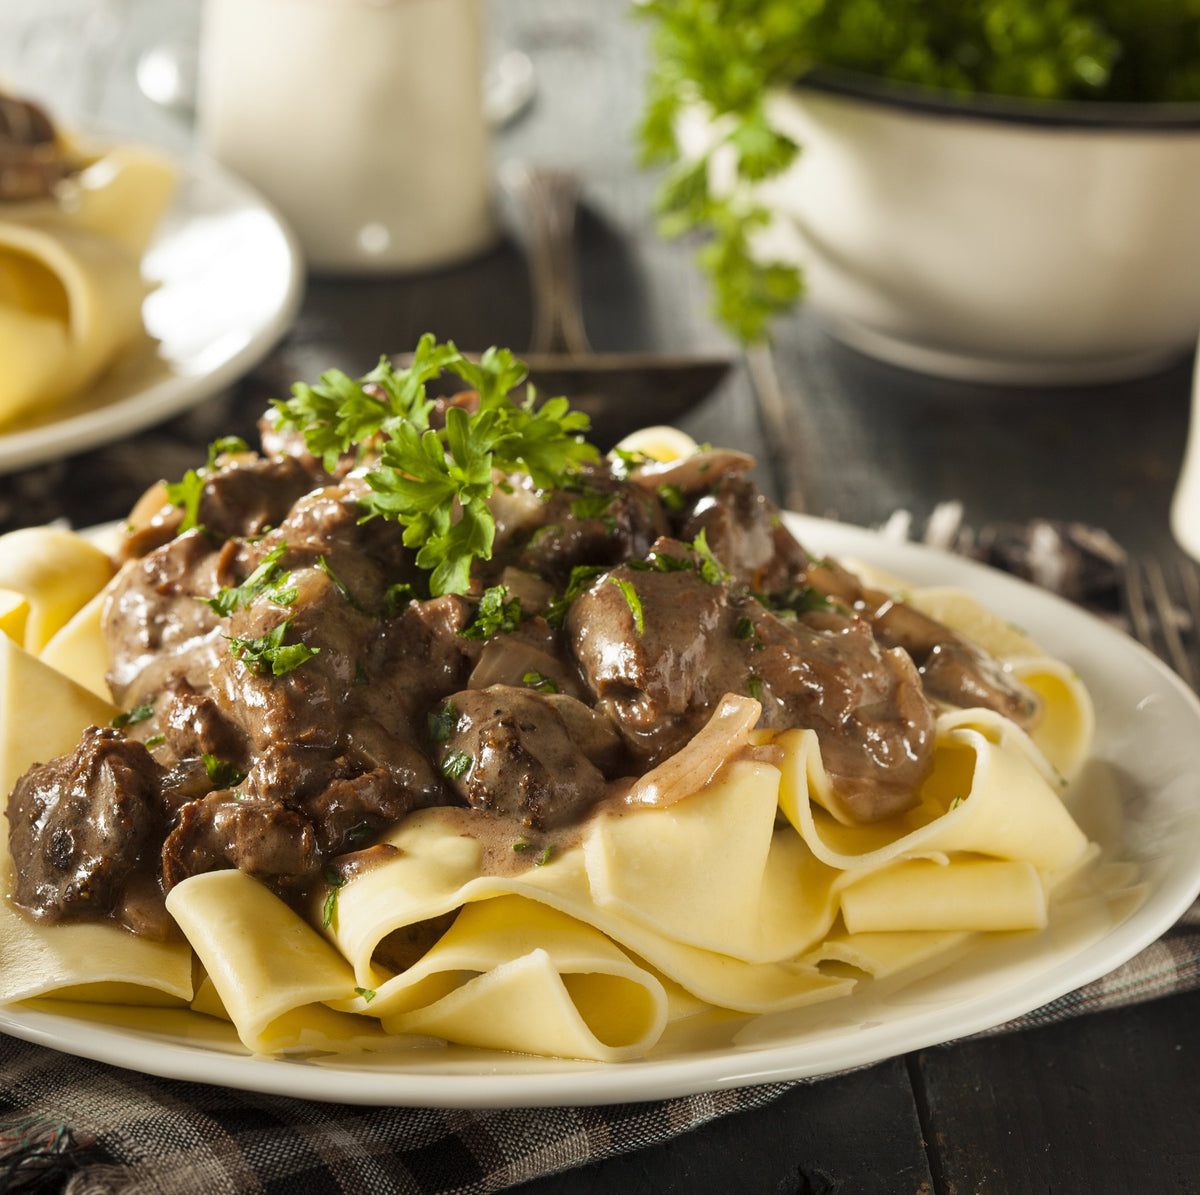 Beef Stroganoff Assembly Instructions